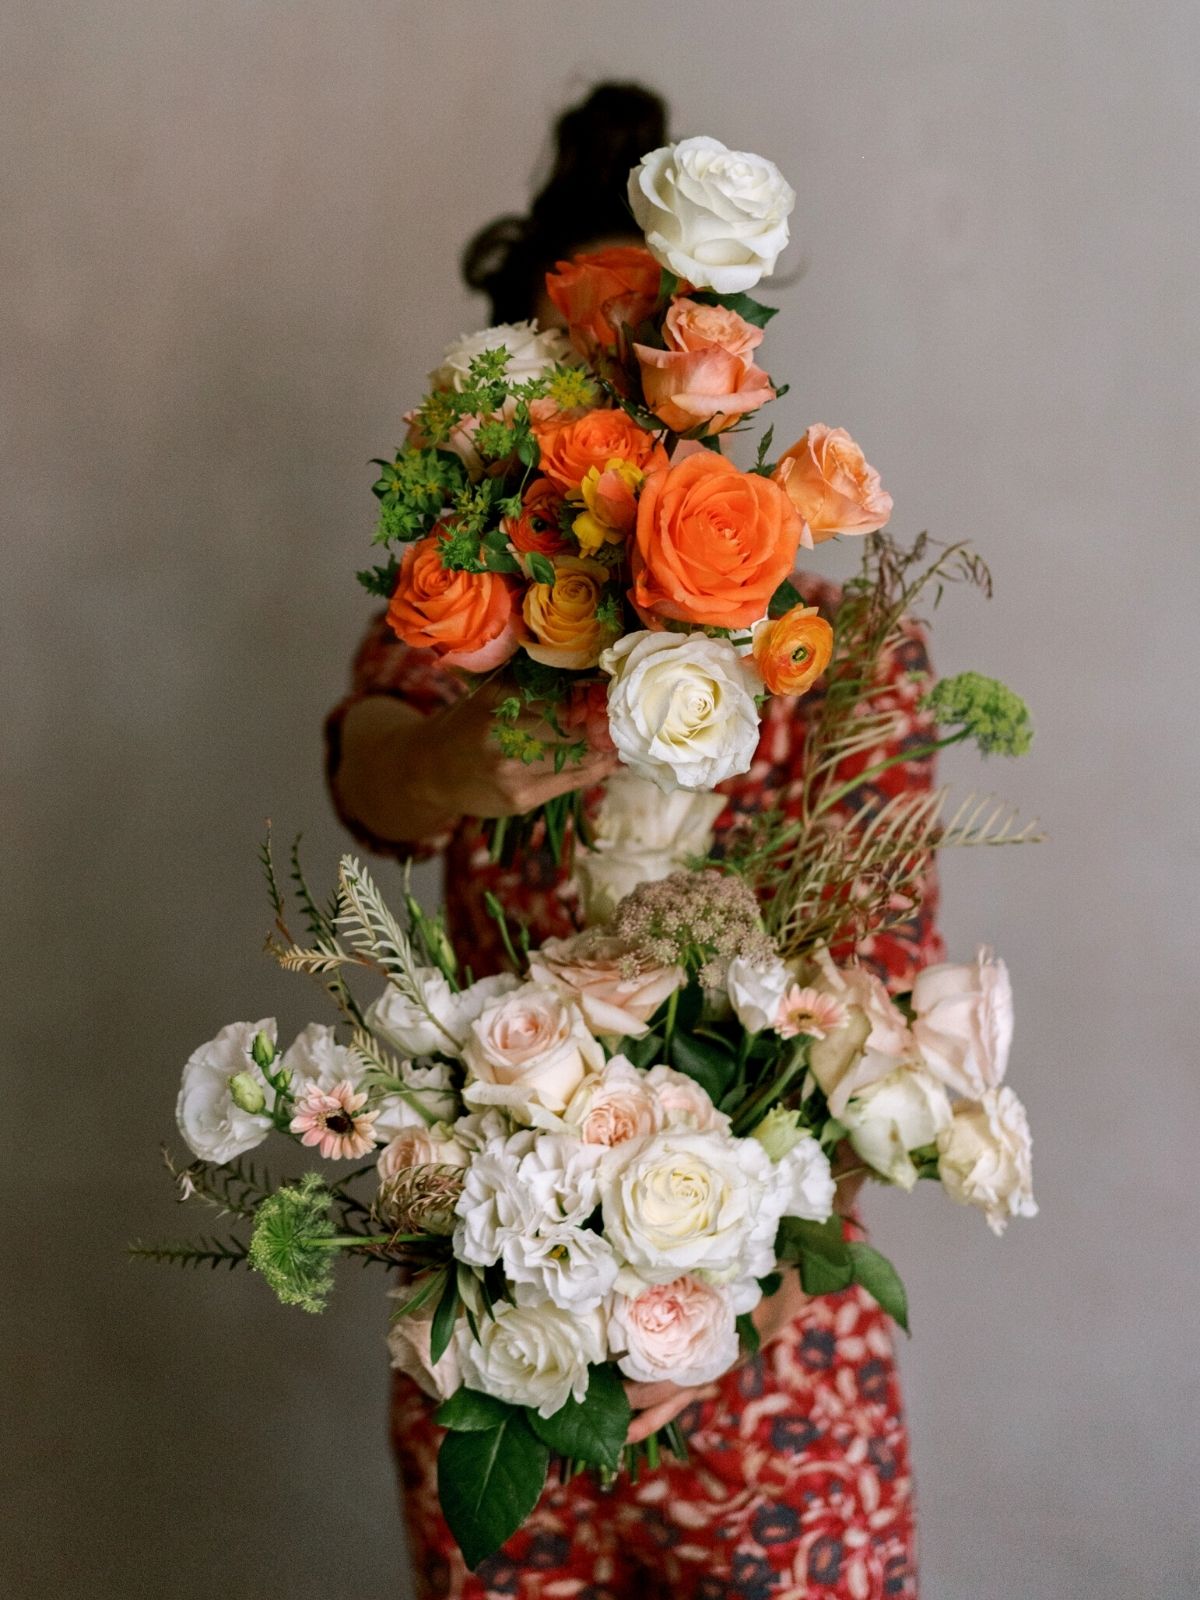 Courtesy Del Cabo Event / Aria Vera - Yamile Bulos hidden behind a bunch of blush and orange flowers - on Thursd